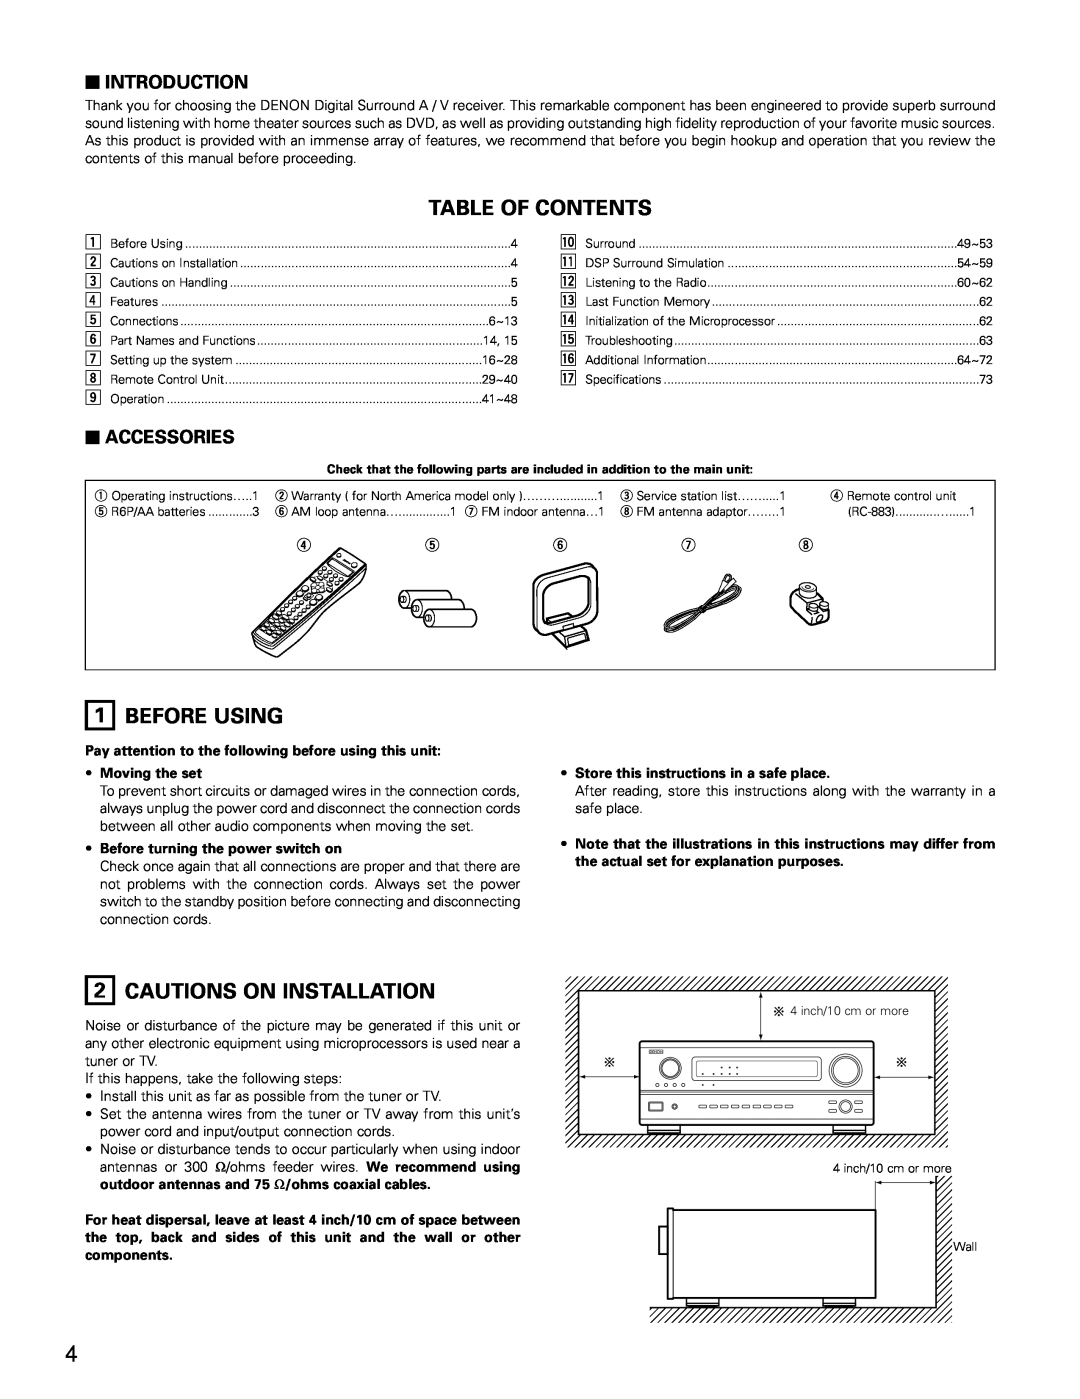 Denon AVR-3802 manual Table Of Contents, Before Using, Cautions On Installation, 2INTRODUCTION, 2ACCESSORIES 